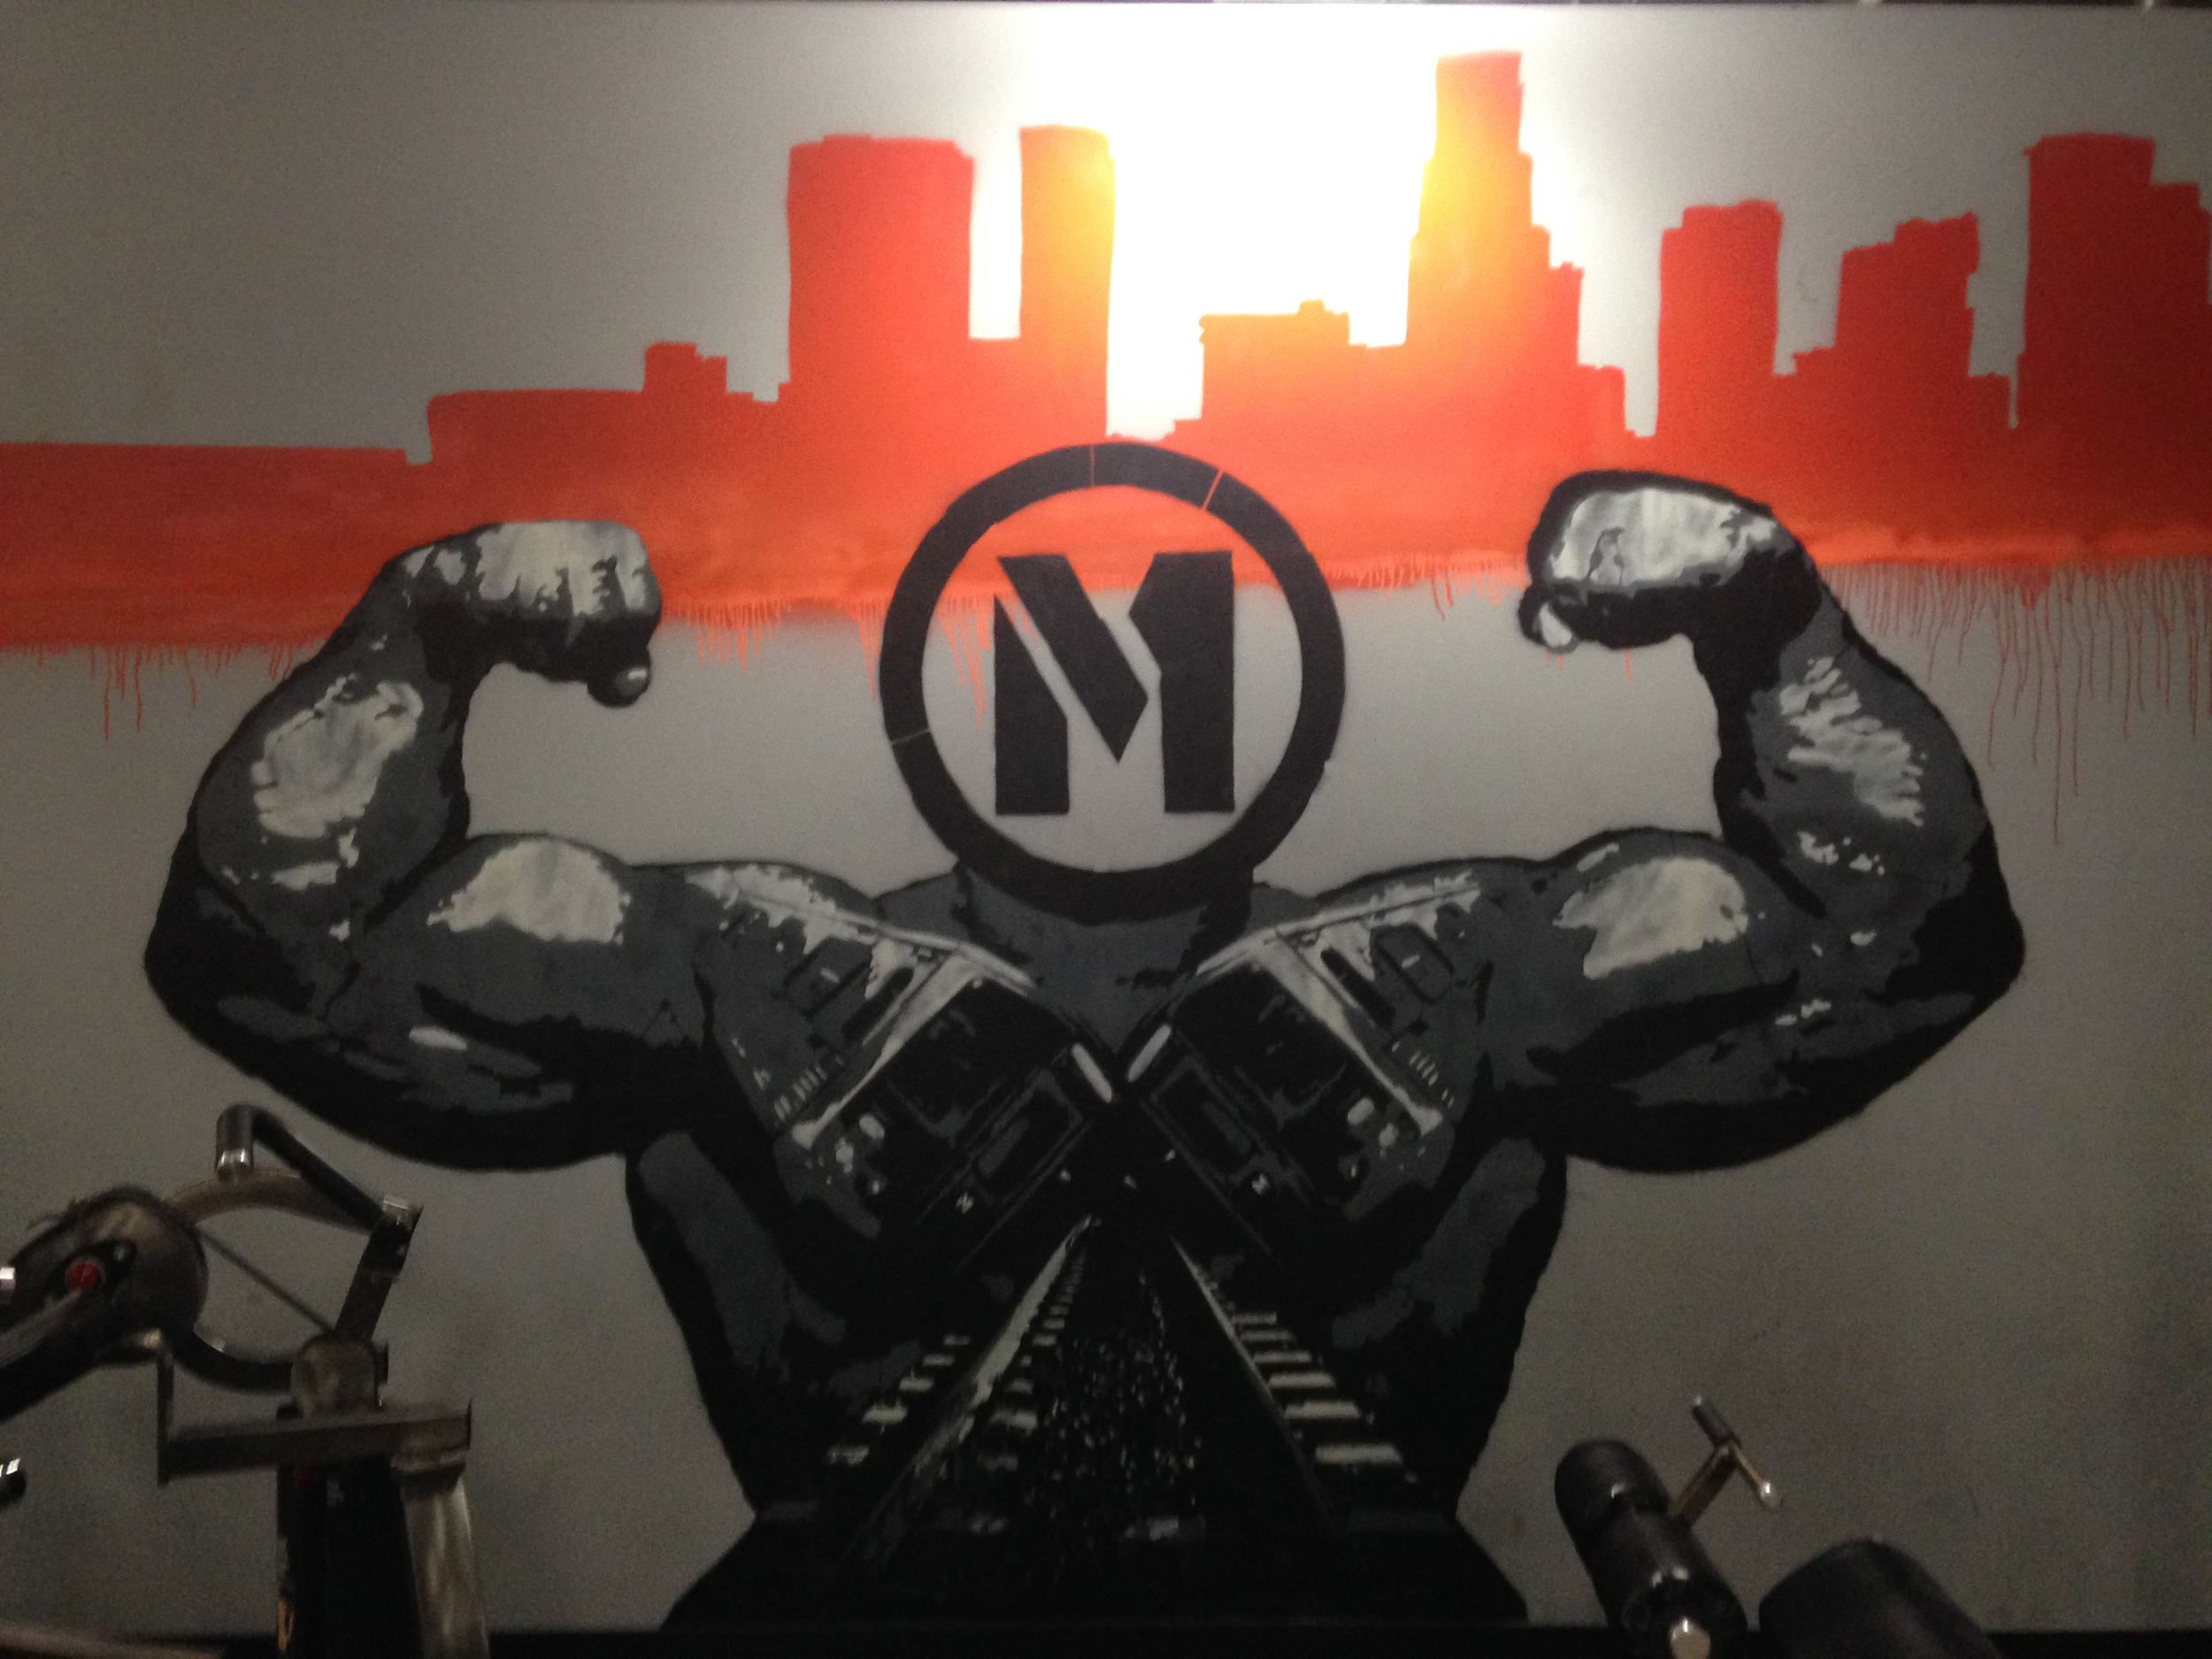 Metro Fitness Mural - Atwater Village - Ca